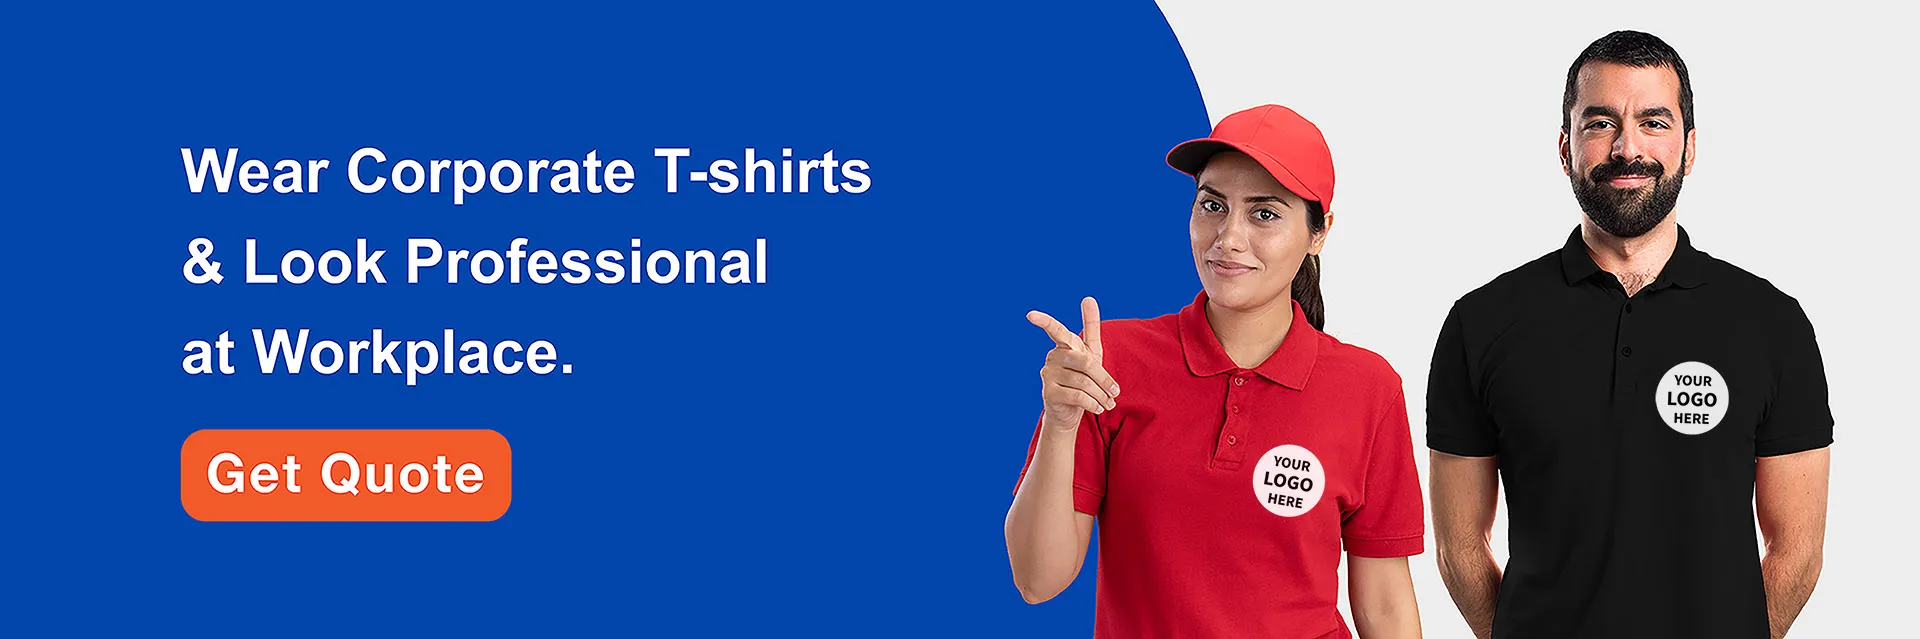 corporate t shirt manufacturers in delhi uniforms for hotels industrial and company staff uniforms